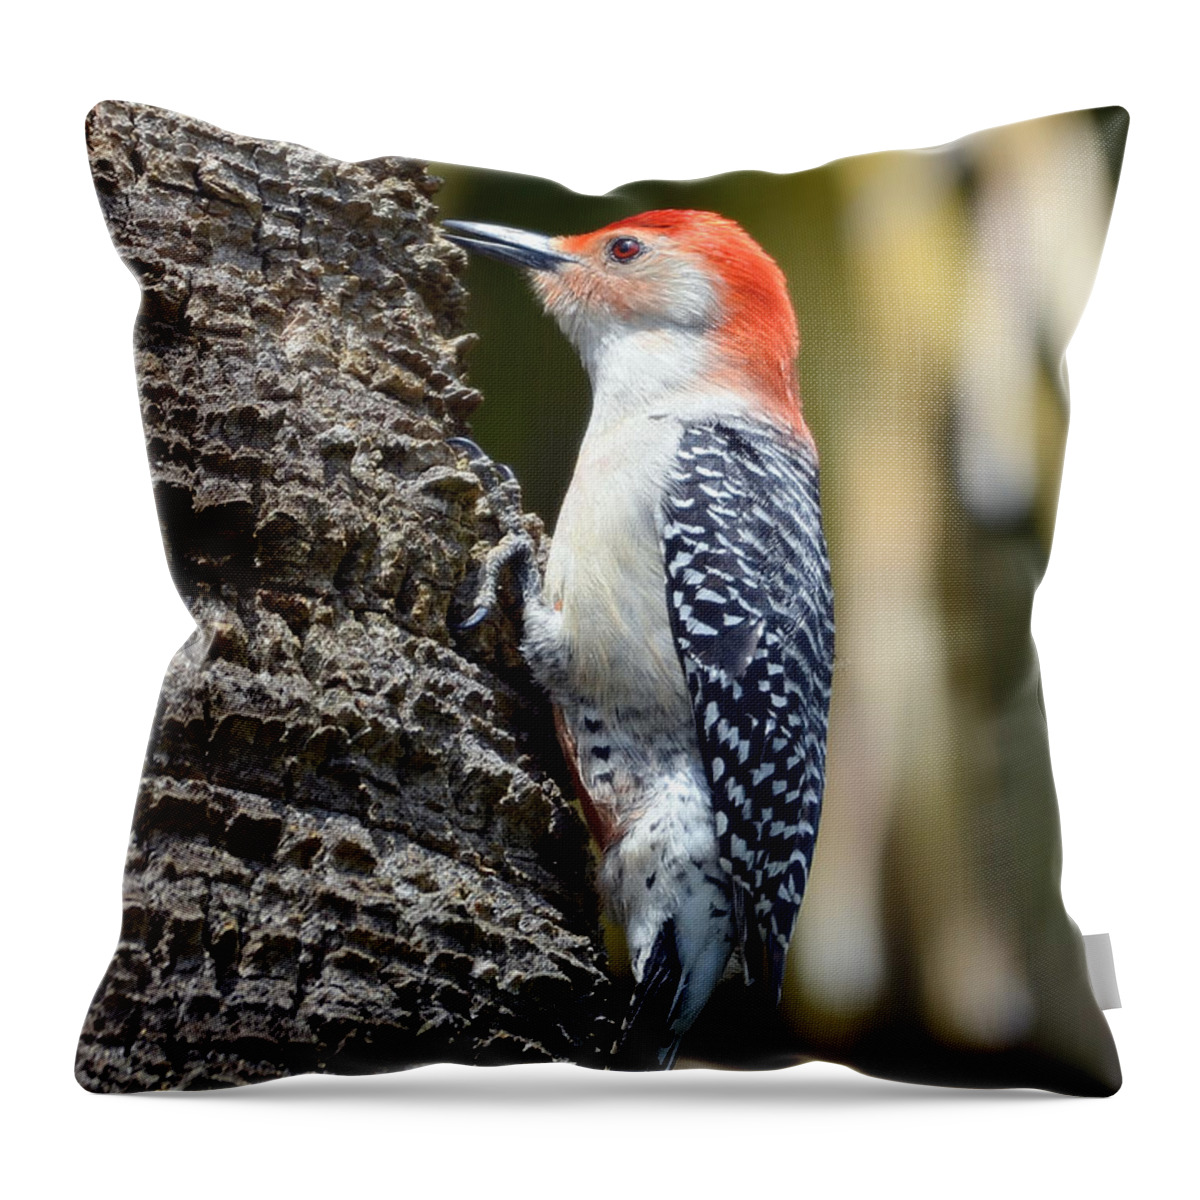 Woodpecker Throw Pillow featuring the photograph Building A Home by Kathy Baccari